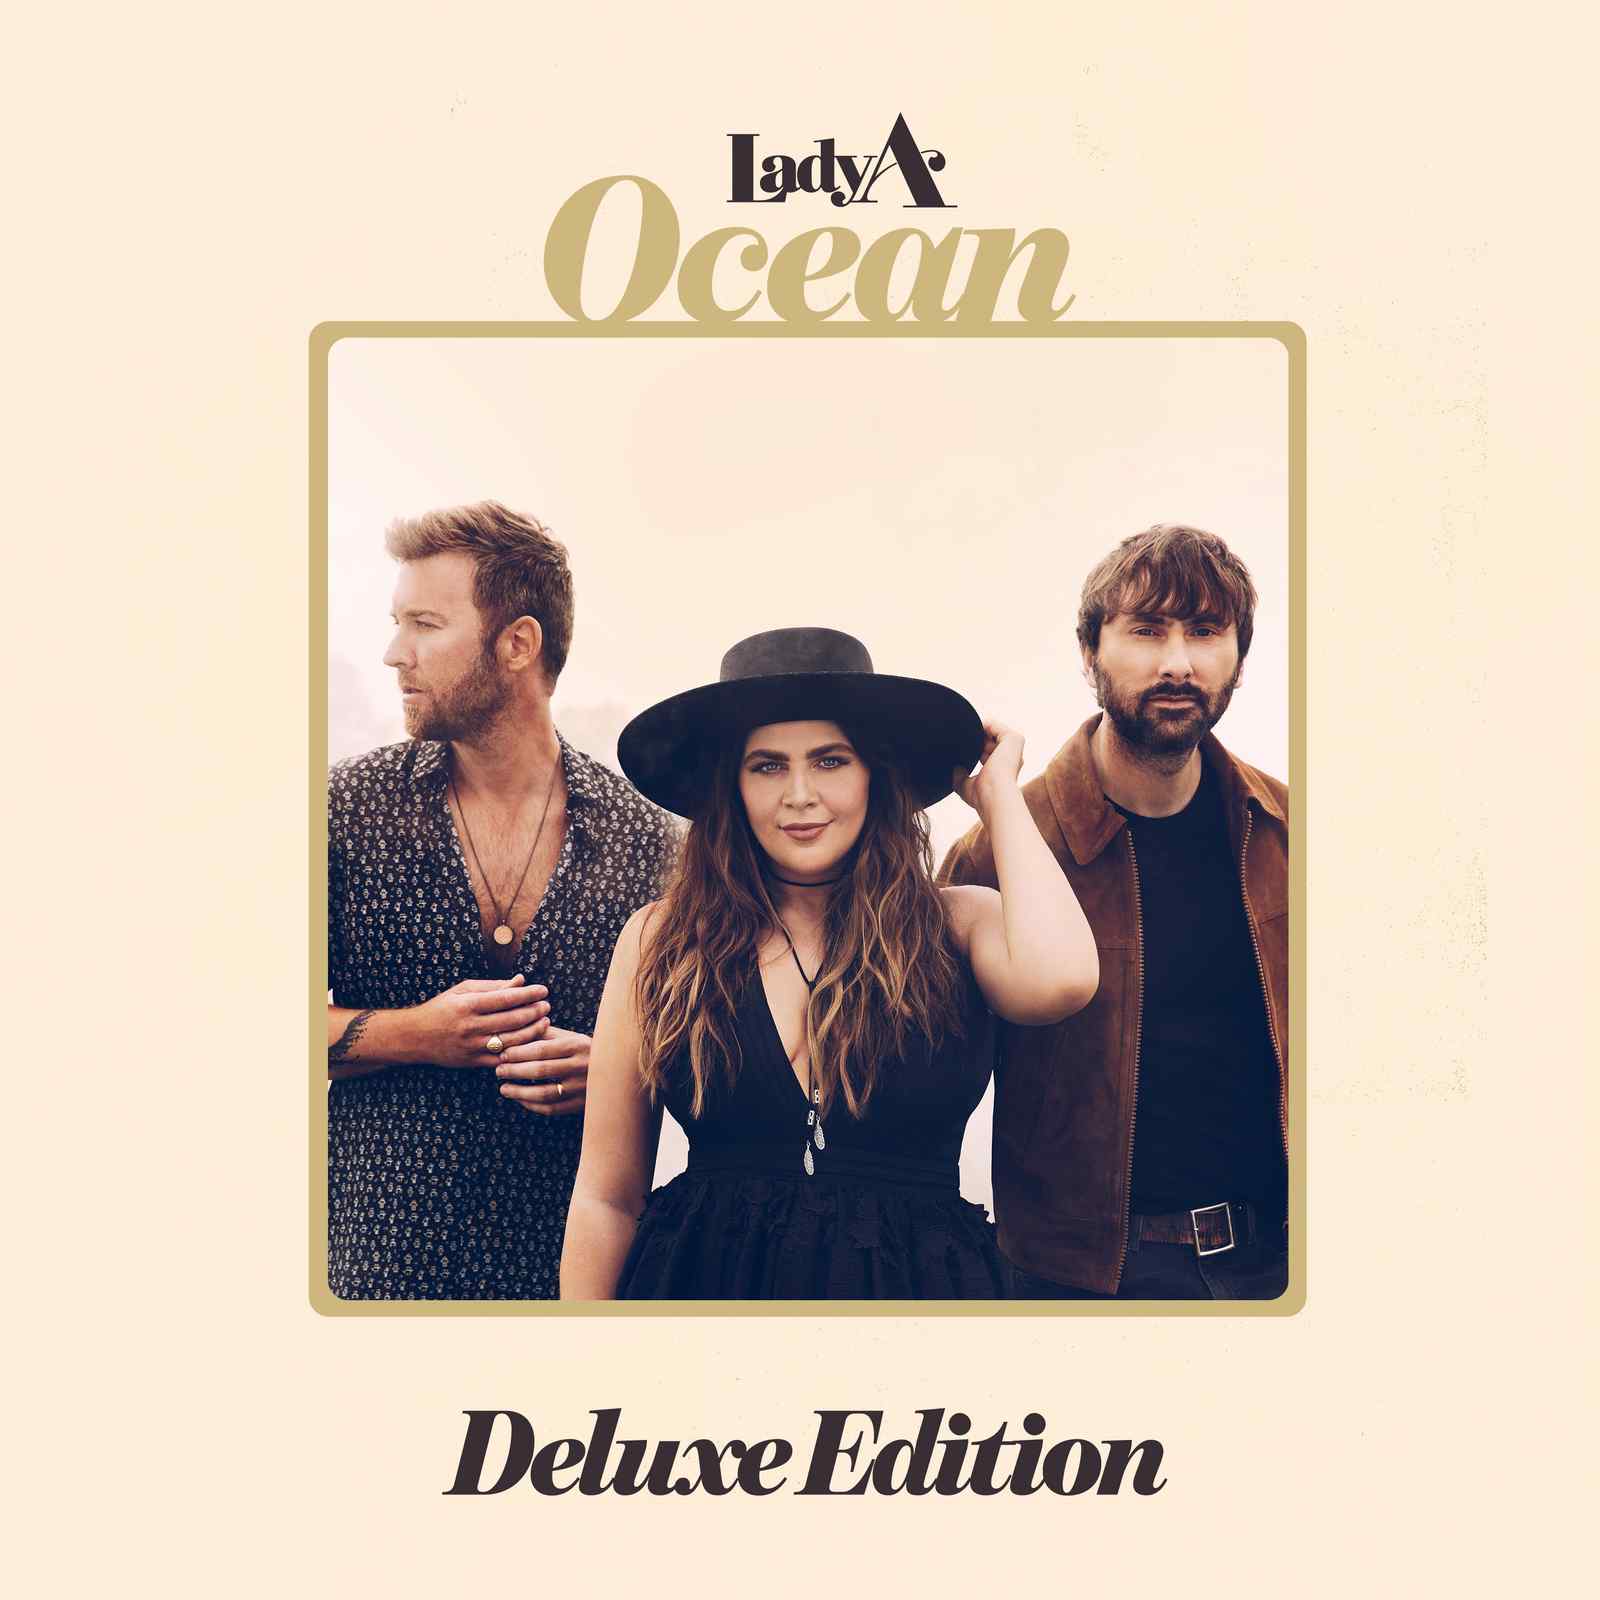 Ocean Deluxe Edition By Lady A